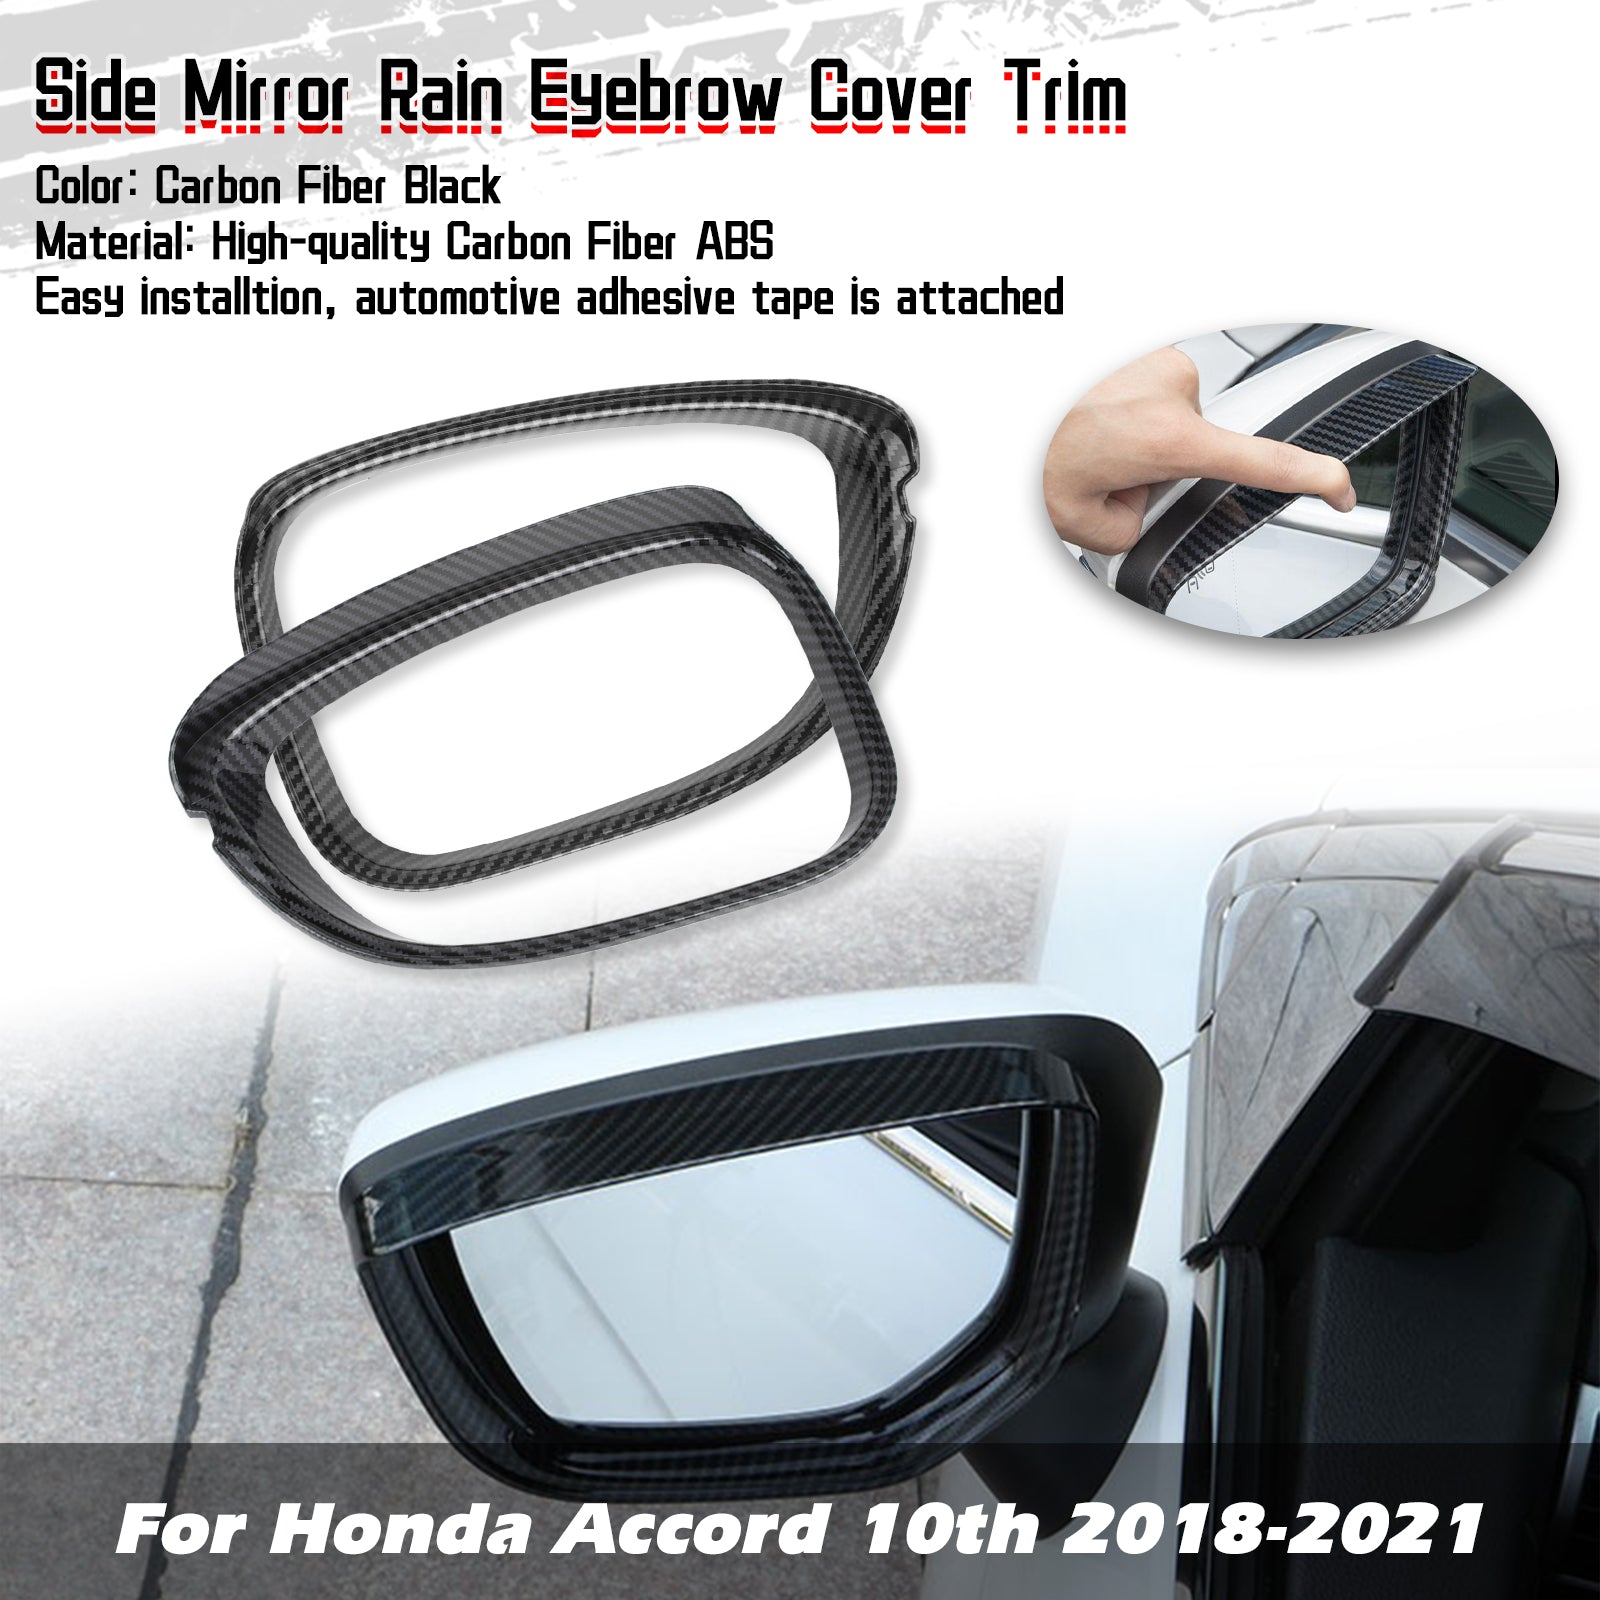 Carbon Fiber Look Side Mirror Eyebrow Cover Trim For Honda Accord 10th